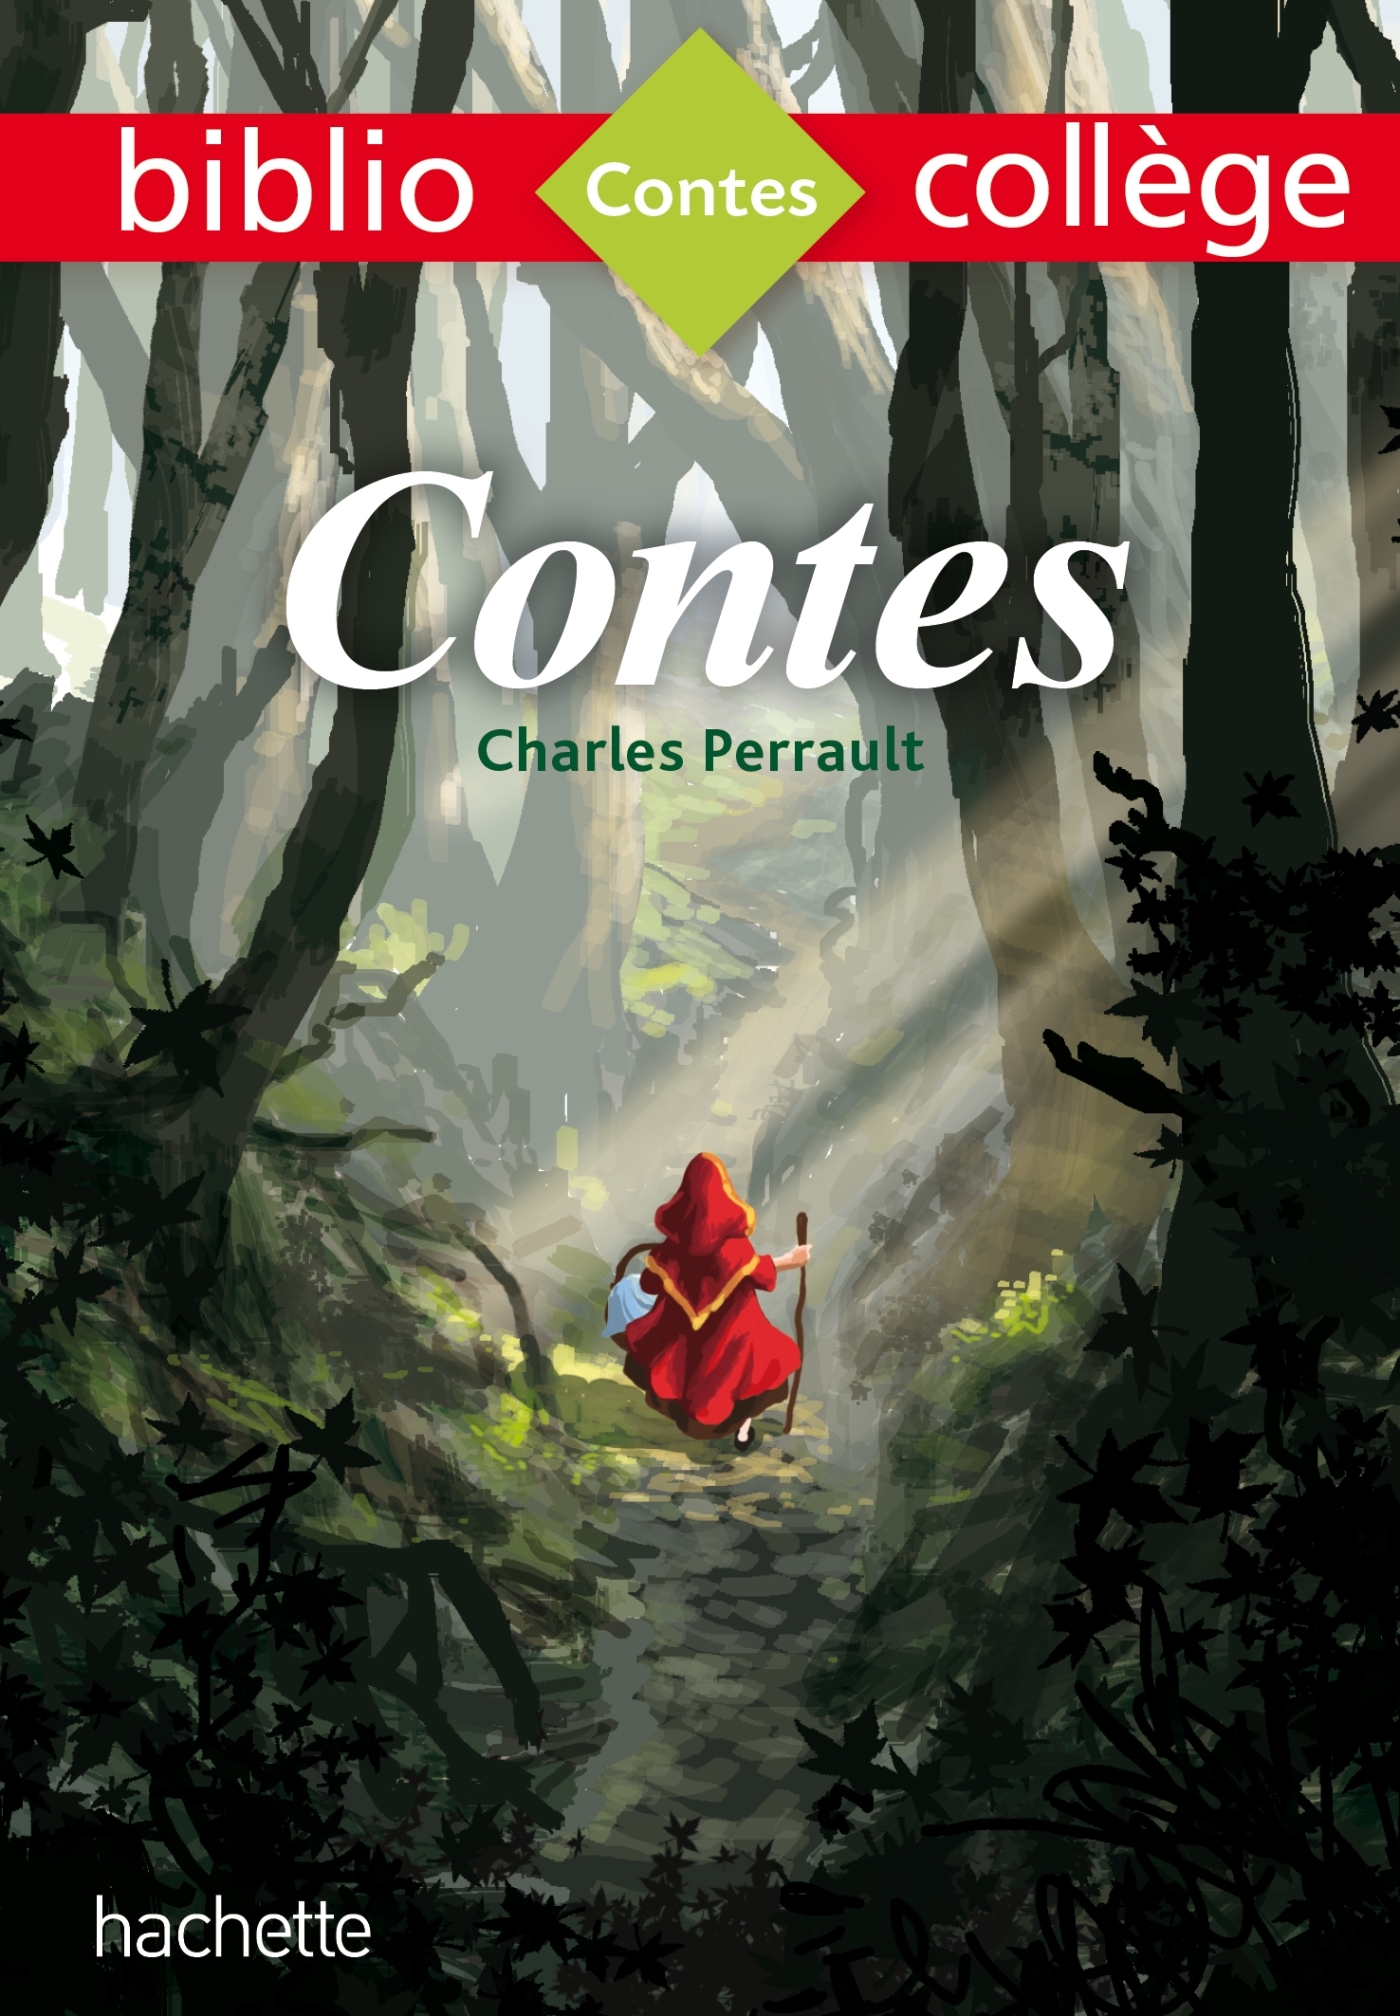 Bibliocollège - Contes, Charles Perrault (9782013949651-front-cover)